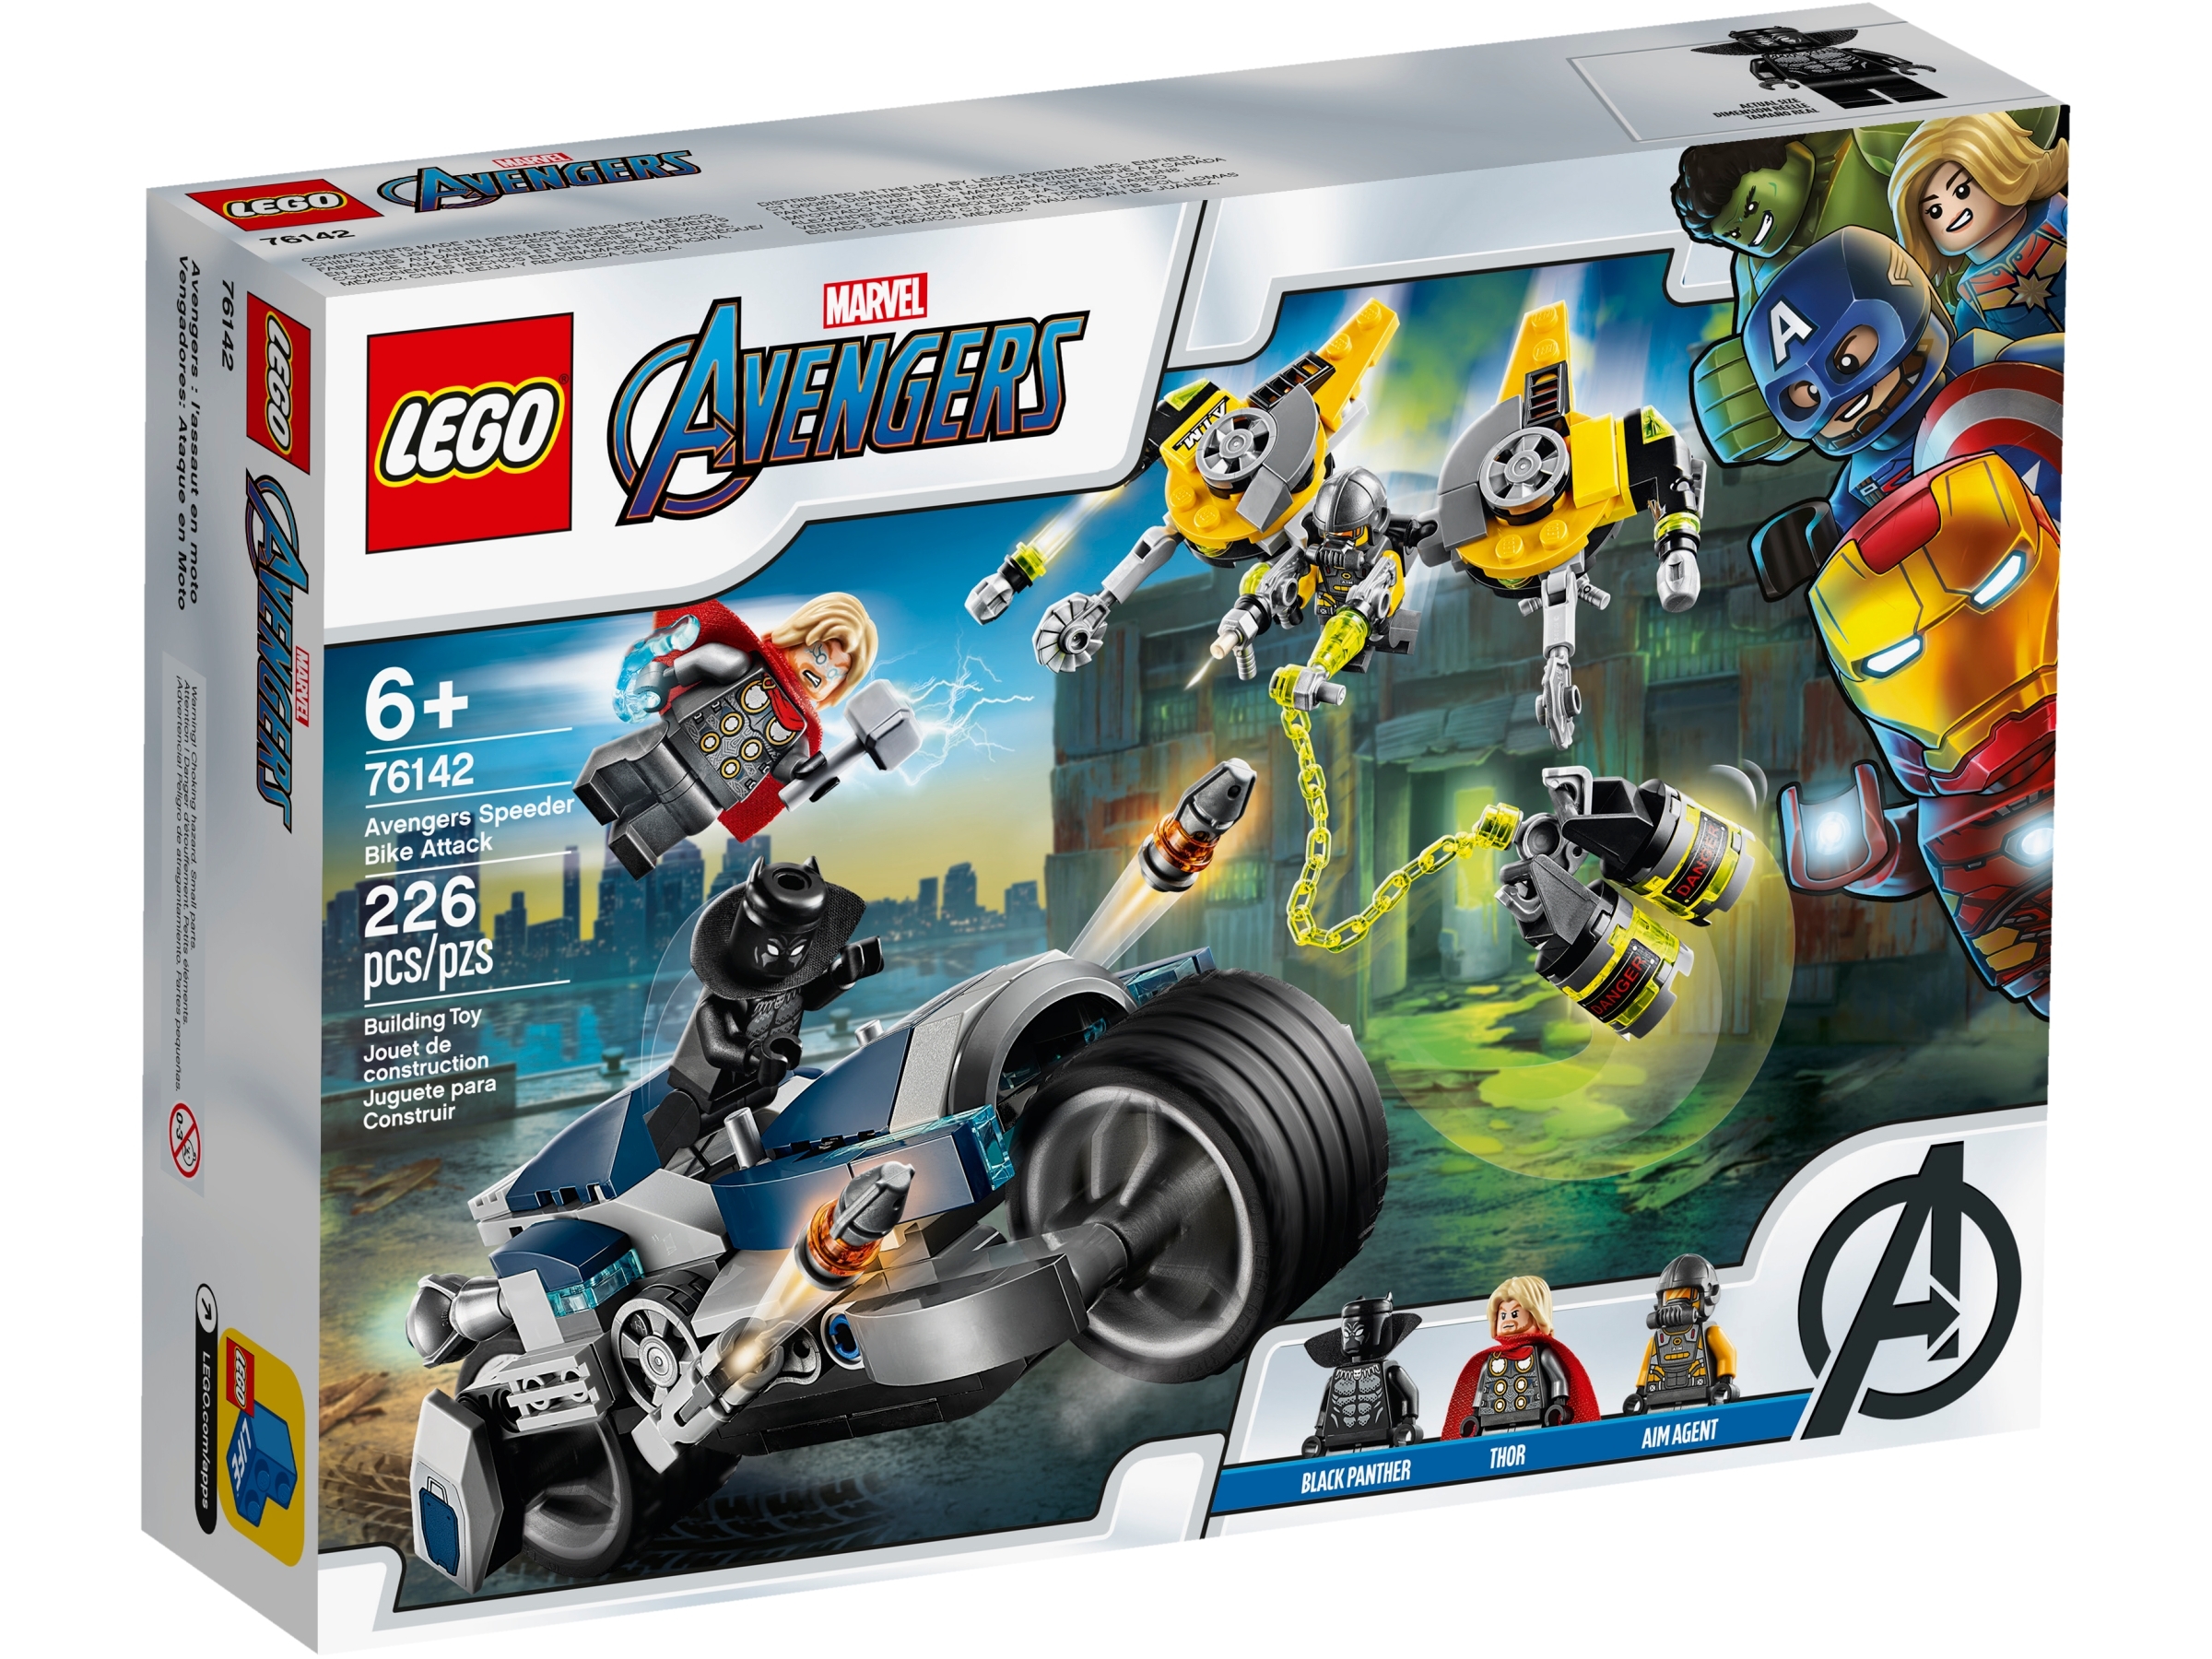 LEGO Marvel Avengers Captain America Outriders Attack Set 76123 - US